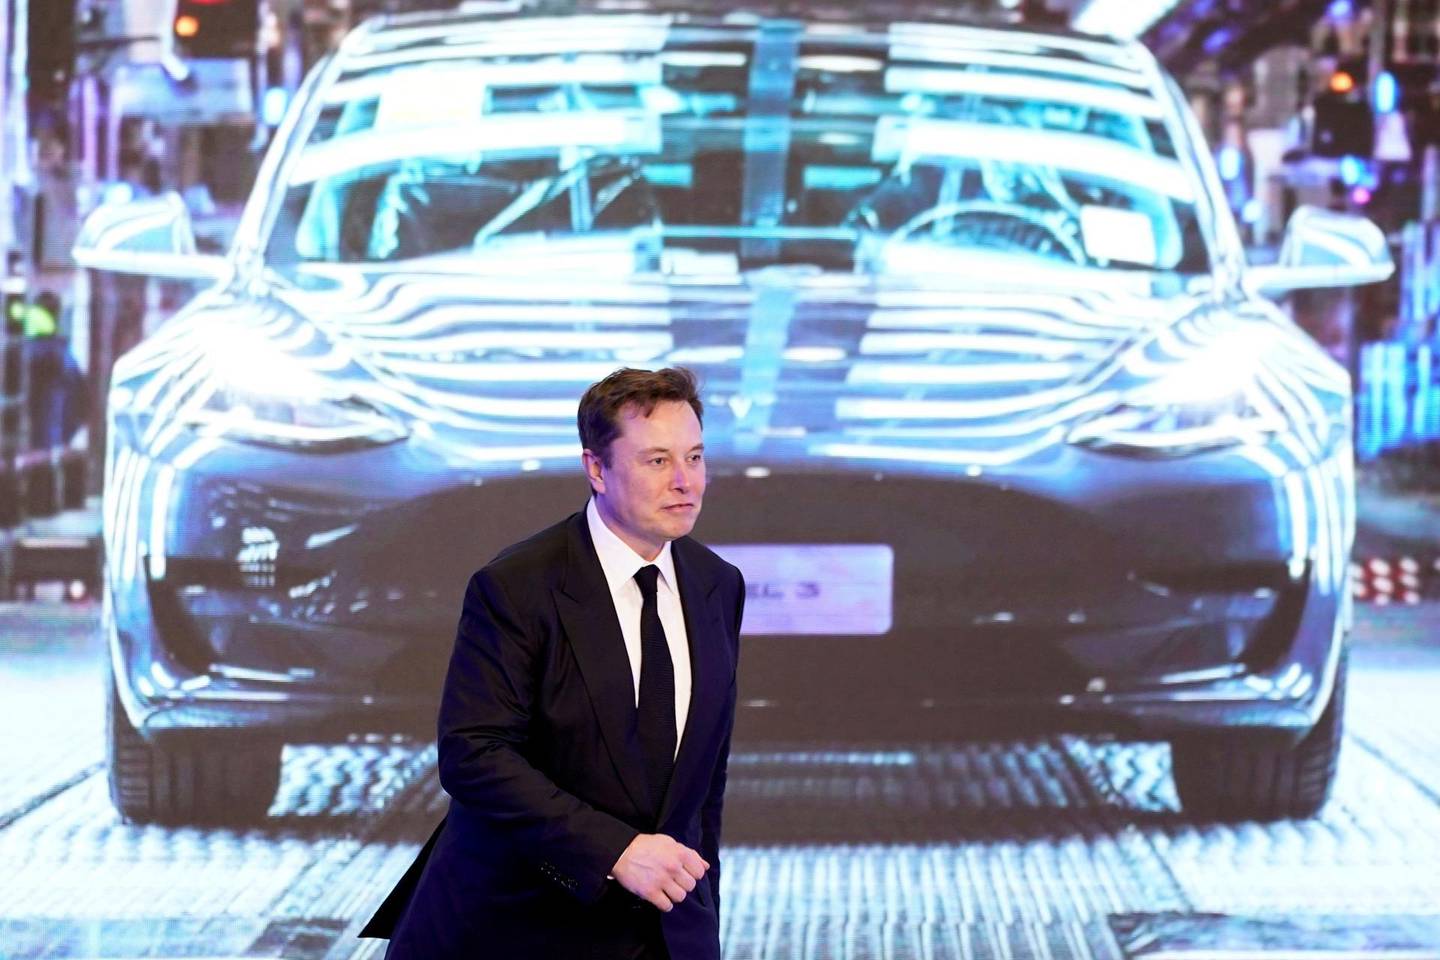 FILE PHOTO: Tesla Inc CEO Elon Musk walks next to a screen showing an image of Tesla Model 3 car during an opening ceremony for Tesla China-made Model Y program in Shanghai, China, January 7, 2020. REUTERS/Aly Song/File Photo